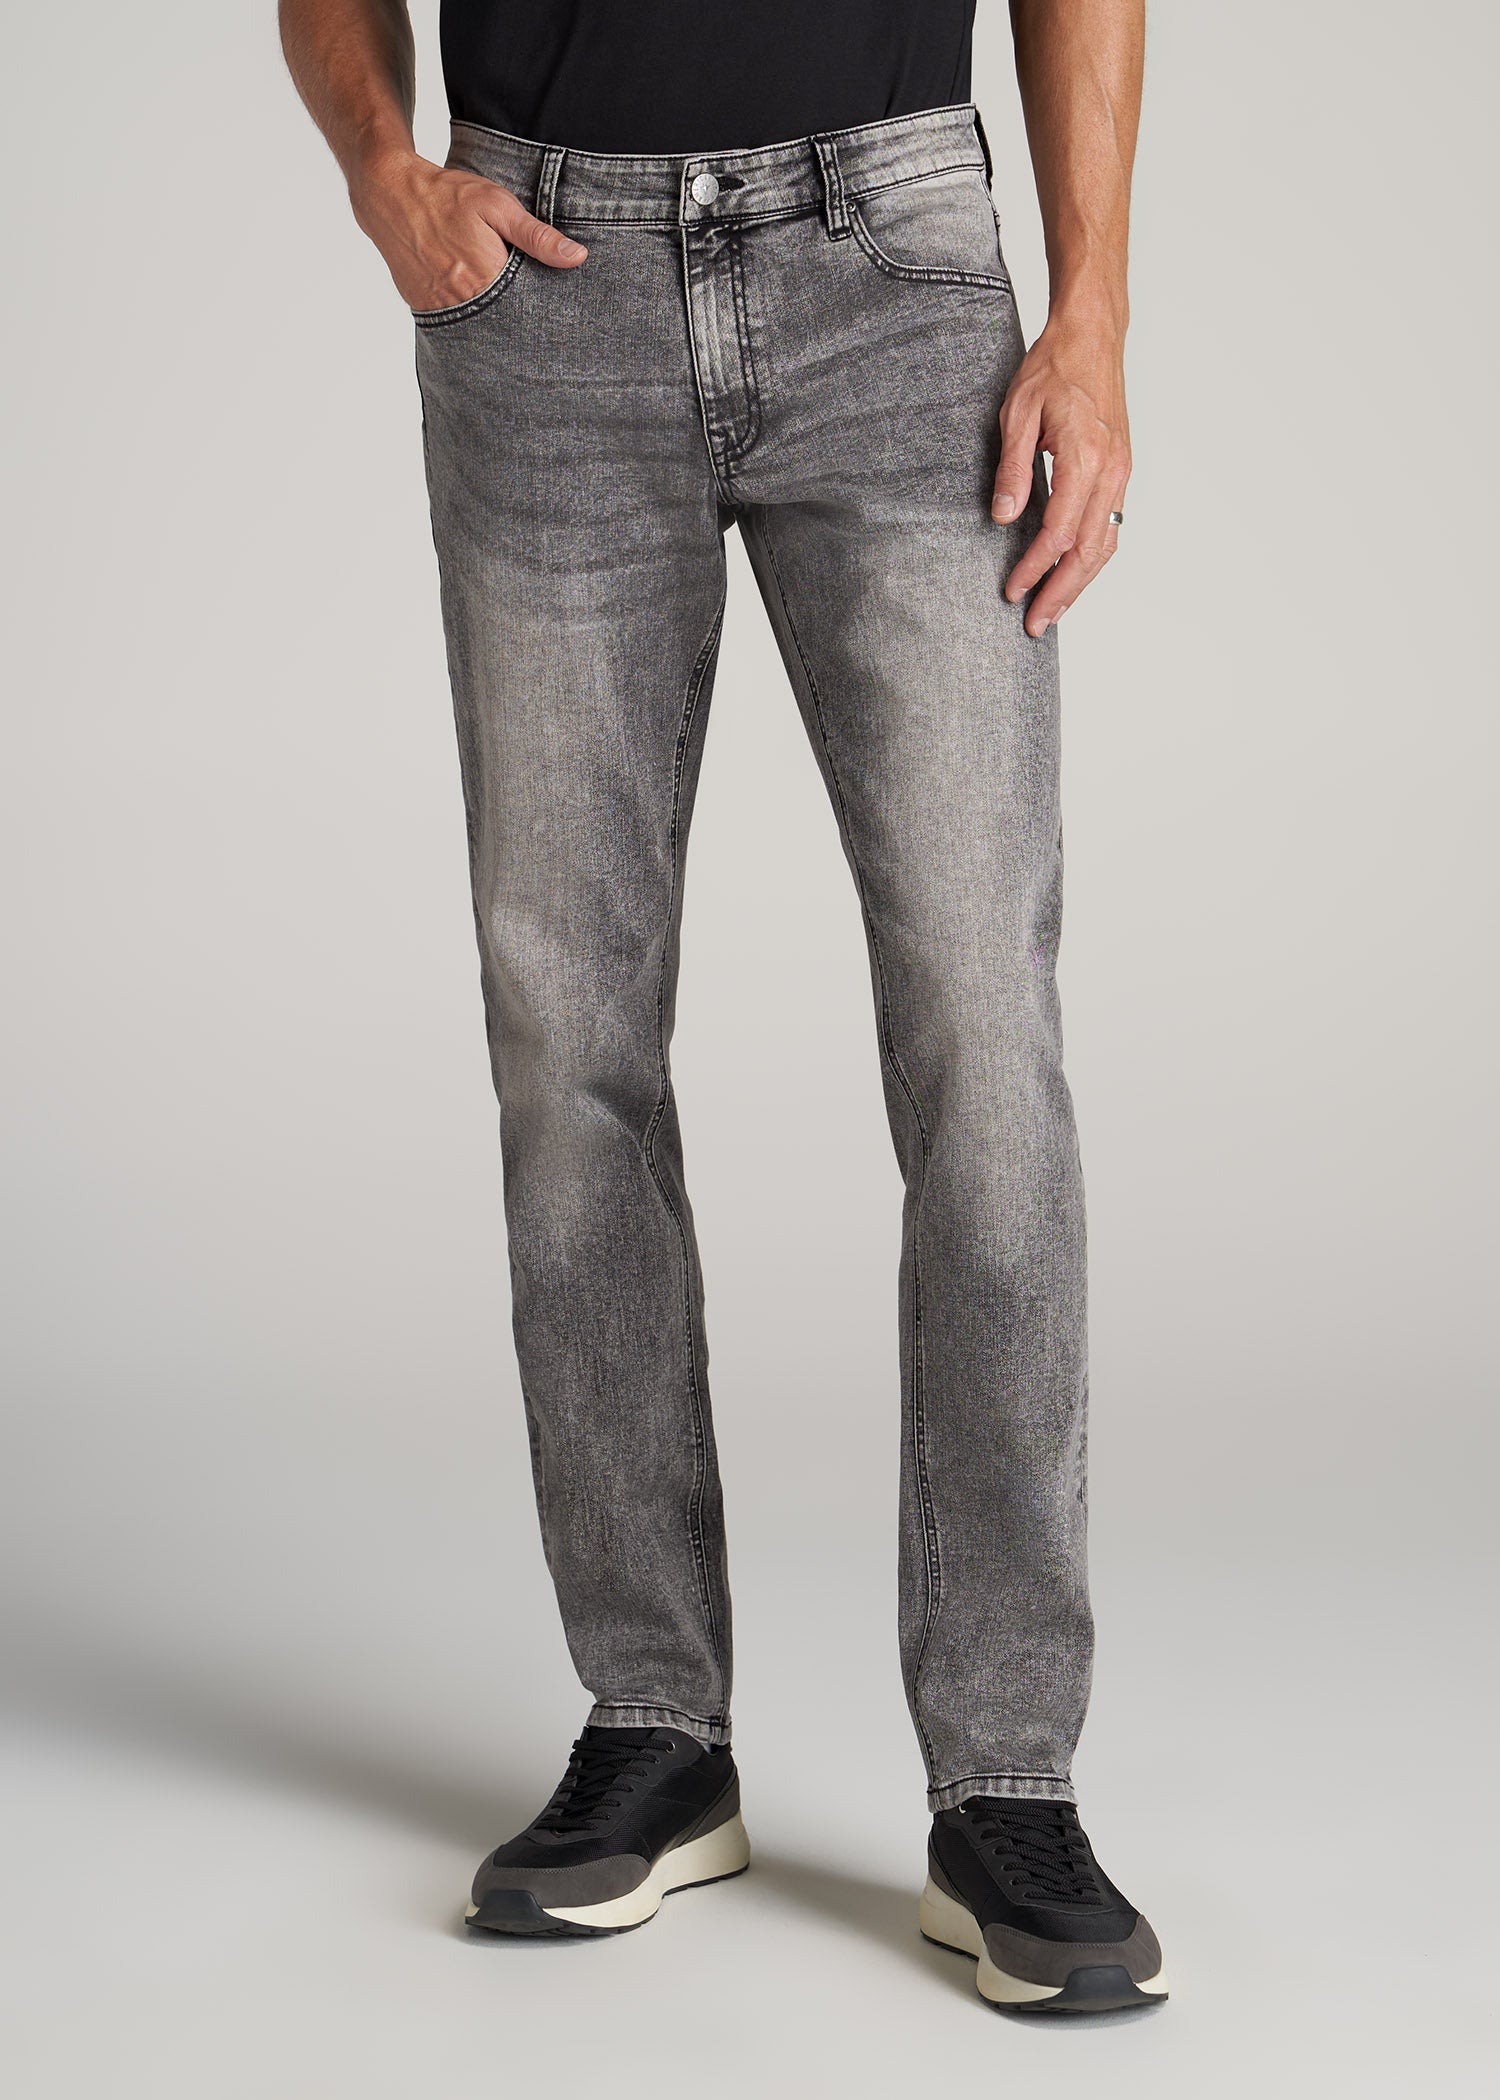 Carman Tapered Jeans For Tall Men Washed Faded Black | American Tall